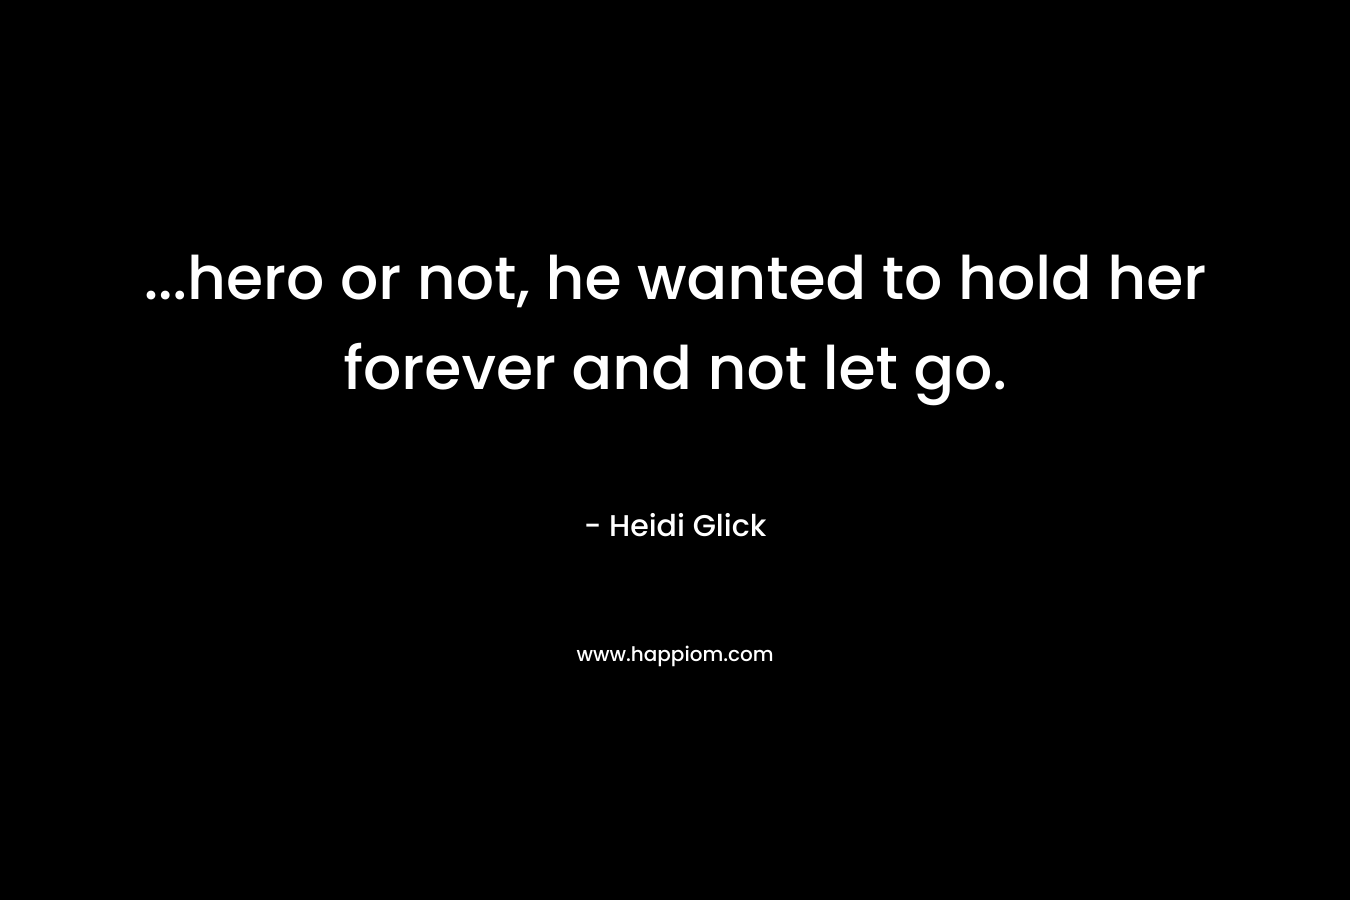 …hero or not, he wanted to hold her forever and not let go. – Heidi Glick